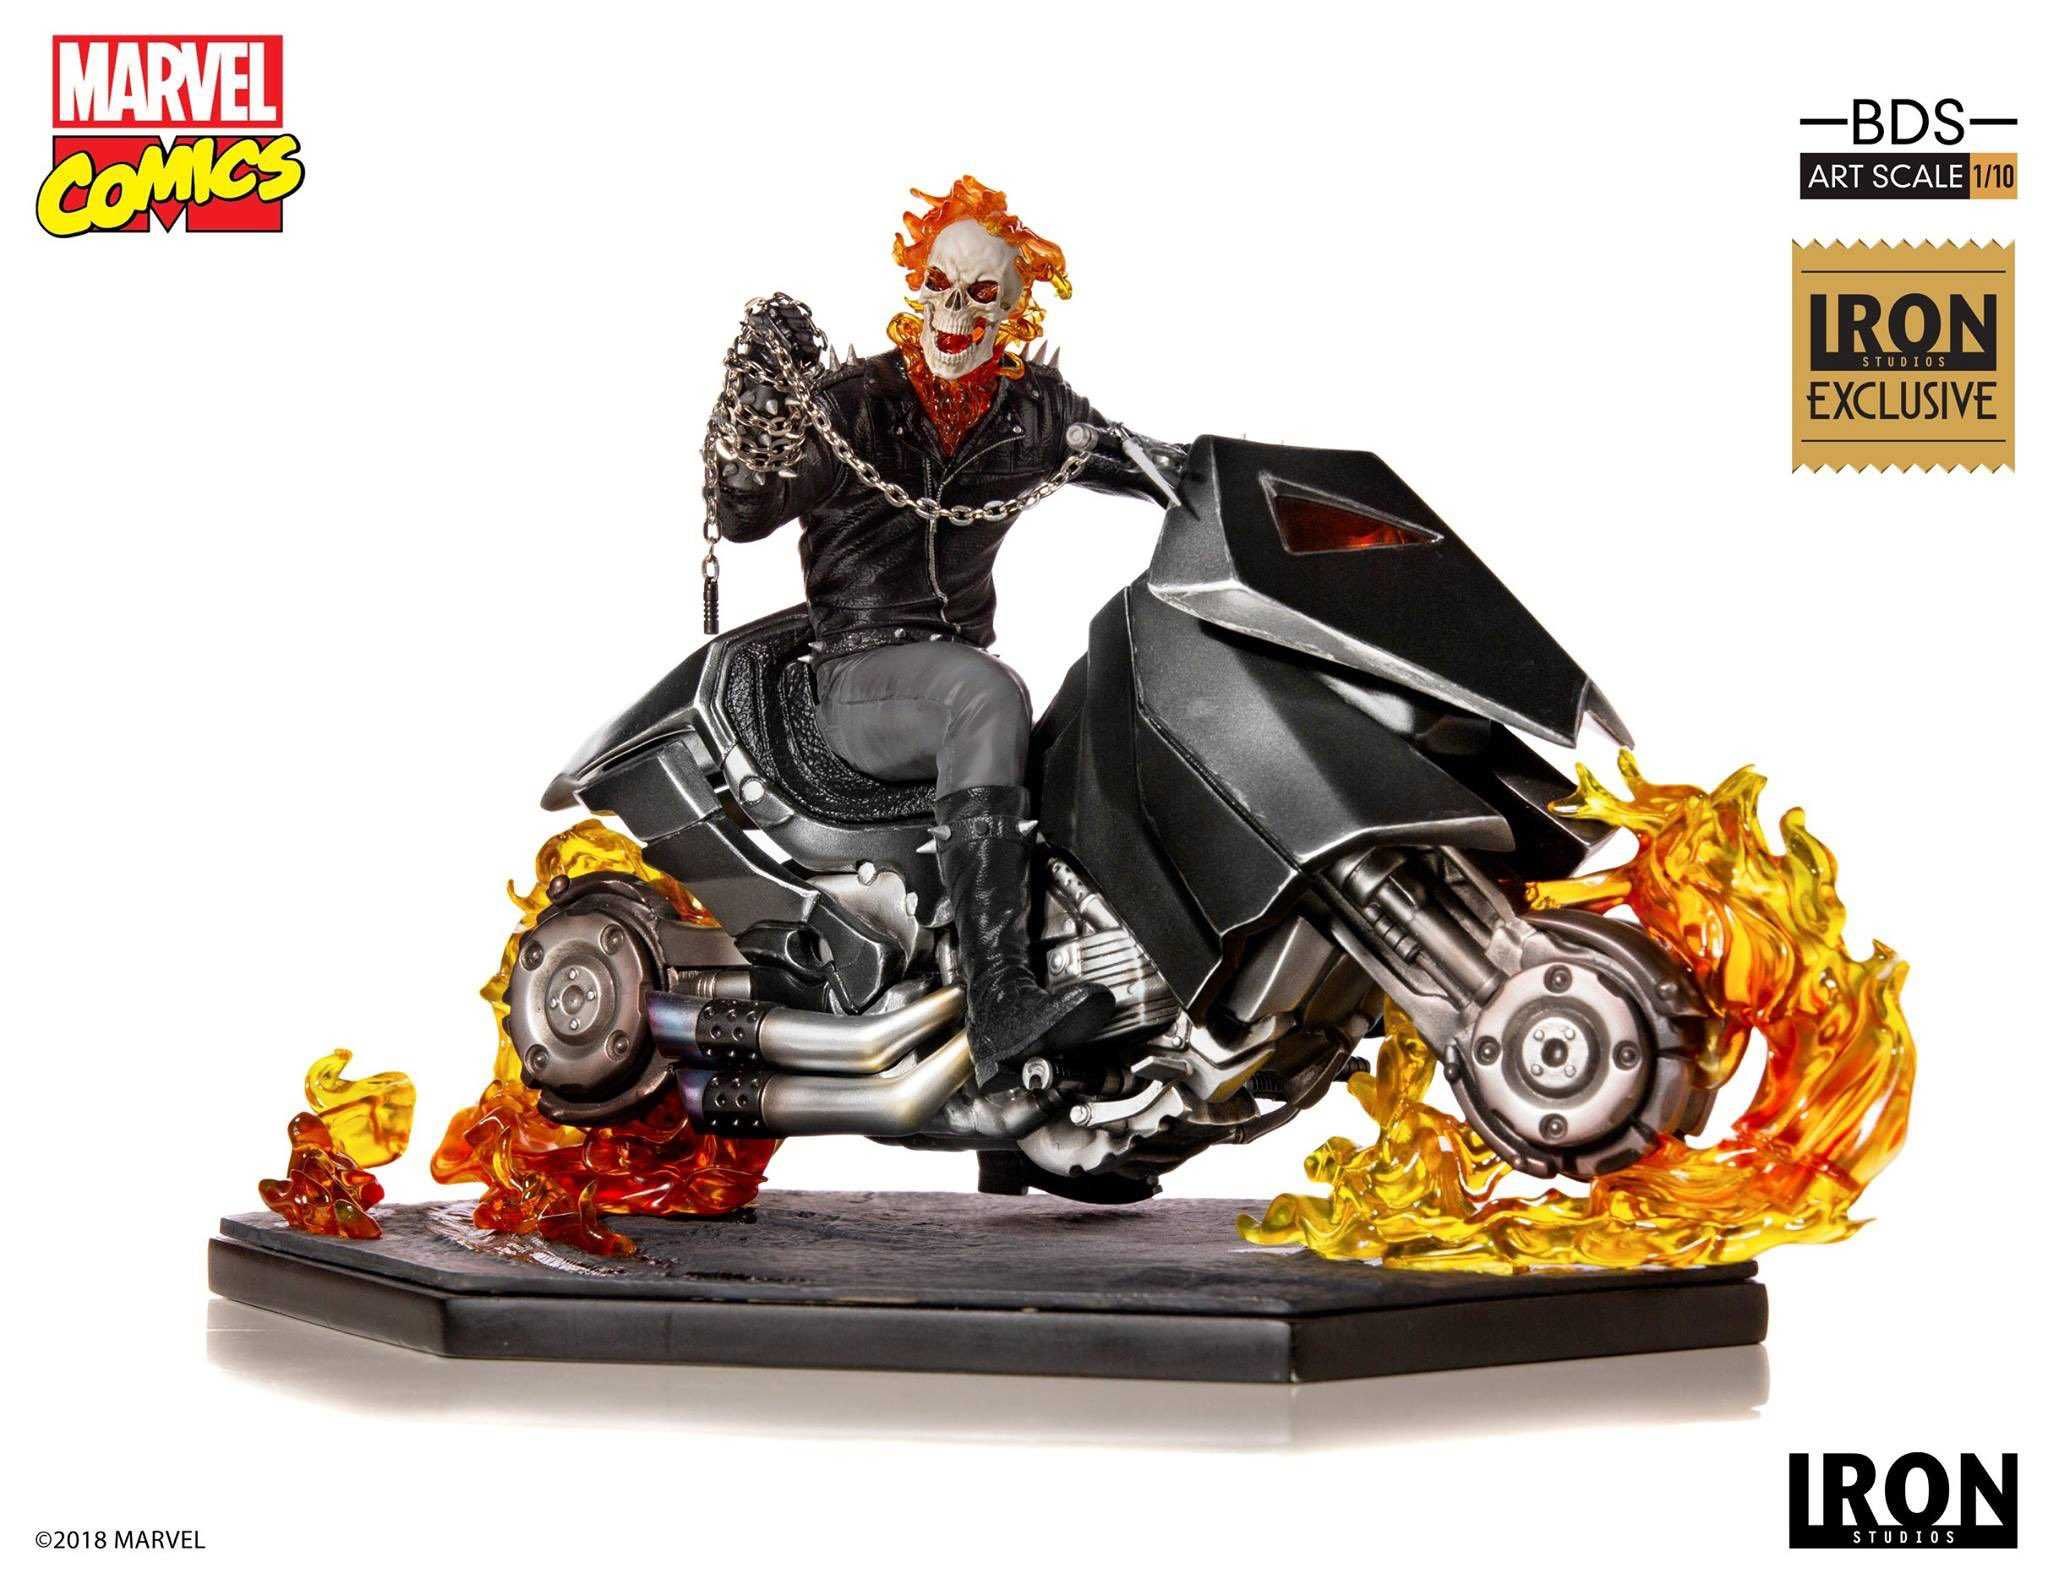 Ghost Rider BDS Art Scale 1/10 Exclusive